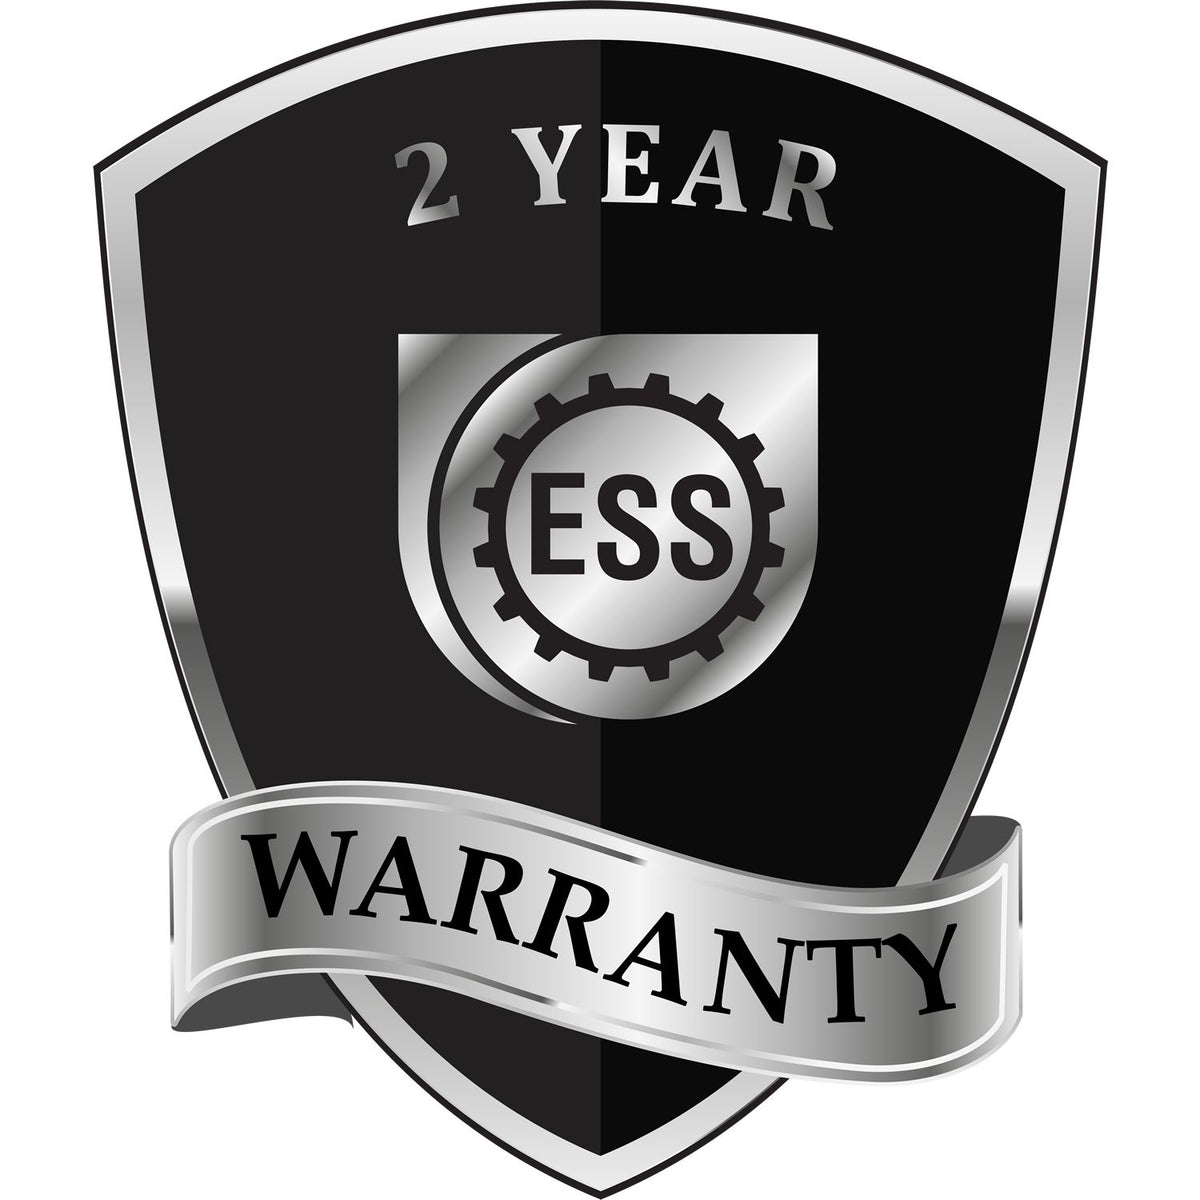 A black and silver badge or emblem showing warranty information for the State of Texas Extended Long Reach Geologist Seal